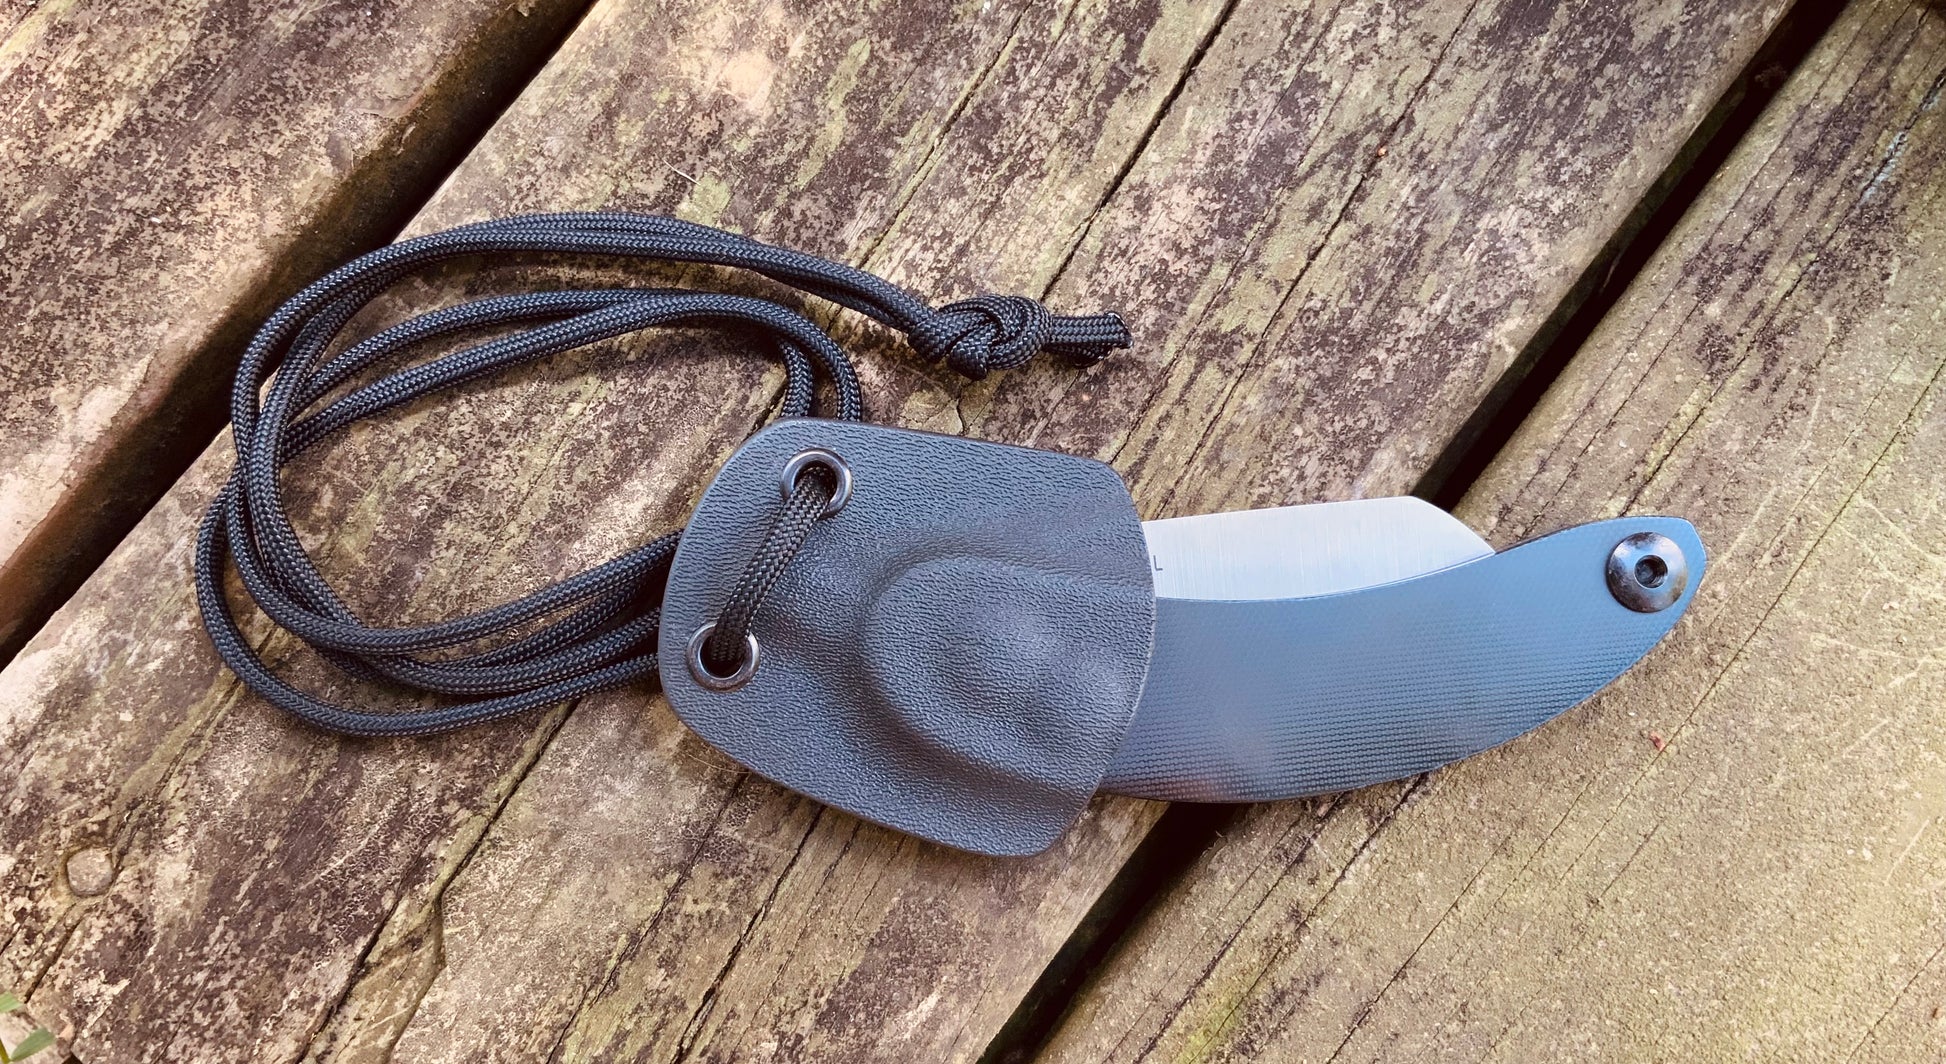 Woods Monkey Neck Knife shown in hand molded Kydex neck knife Sheath with paracord 